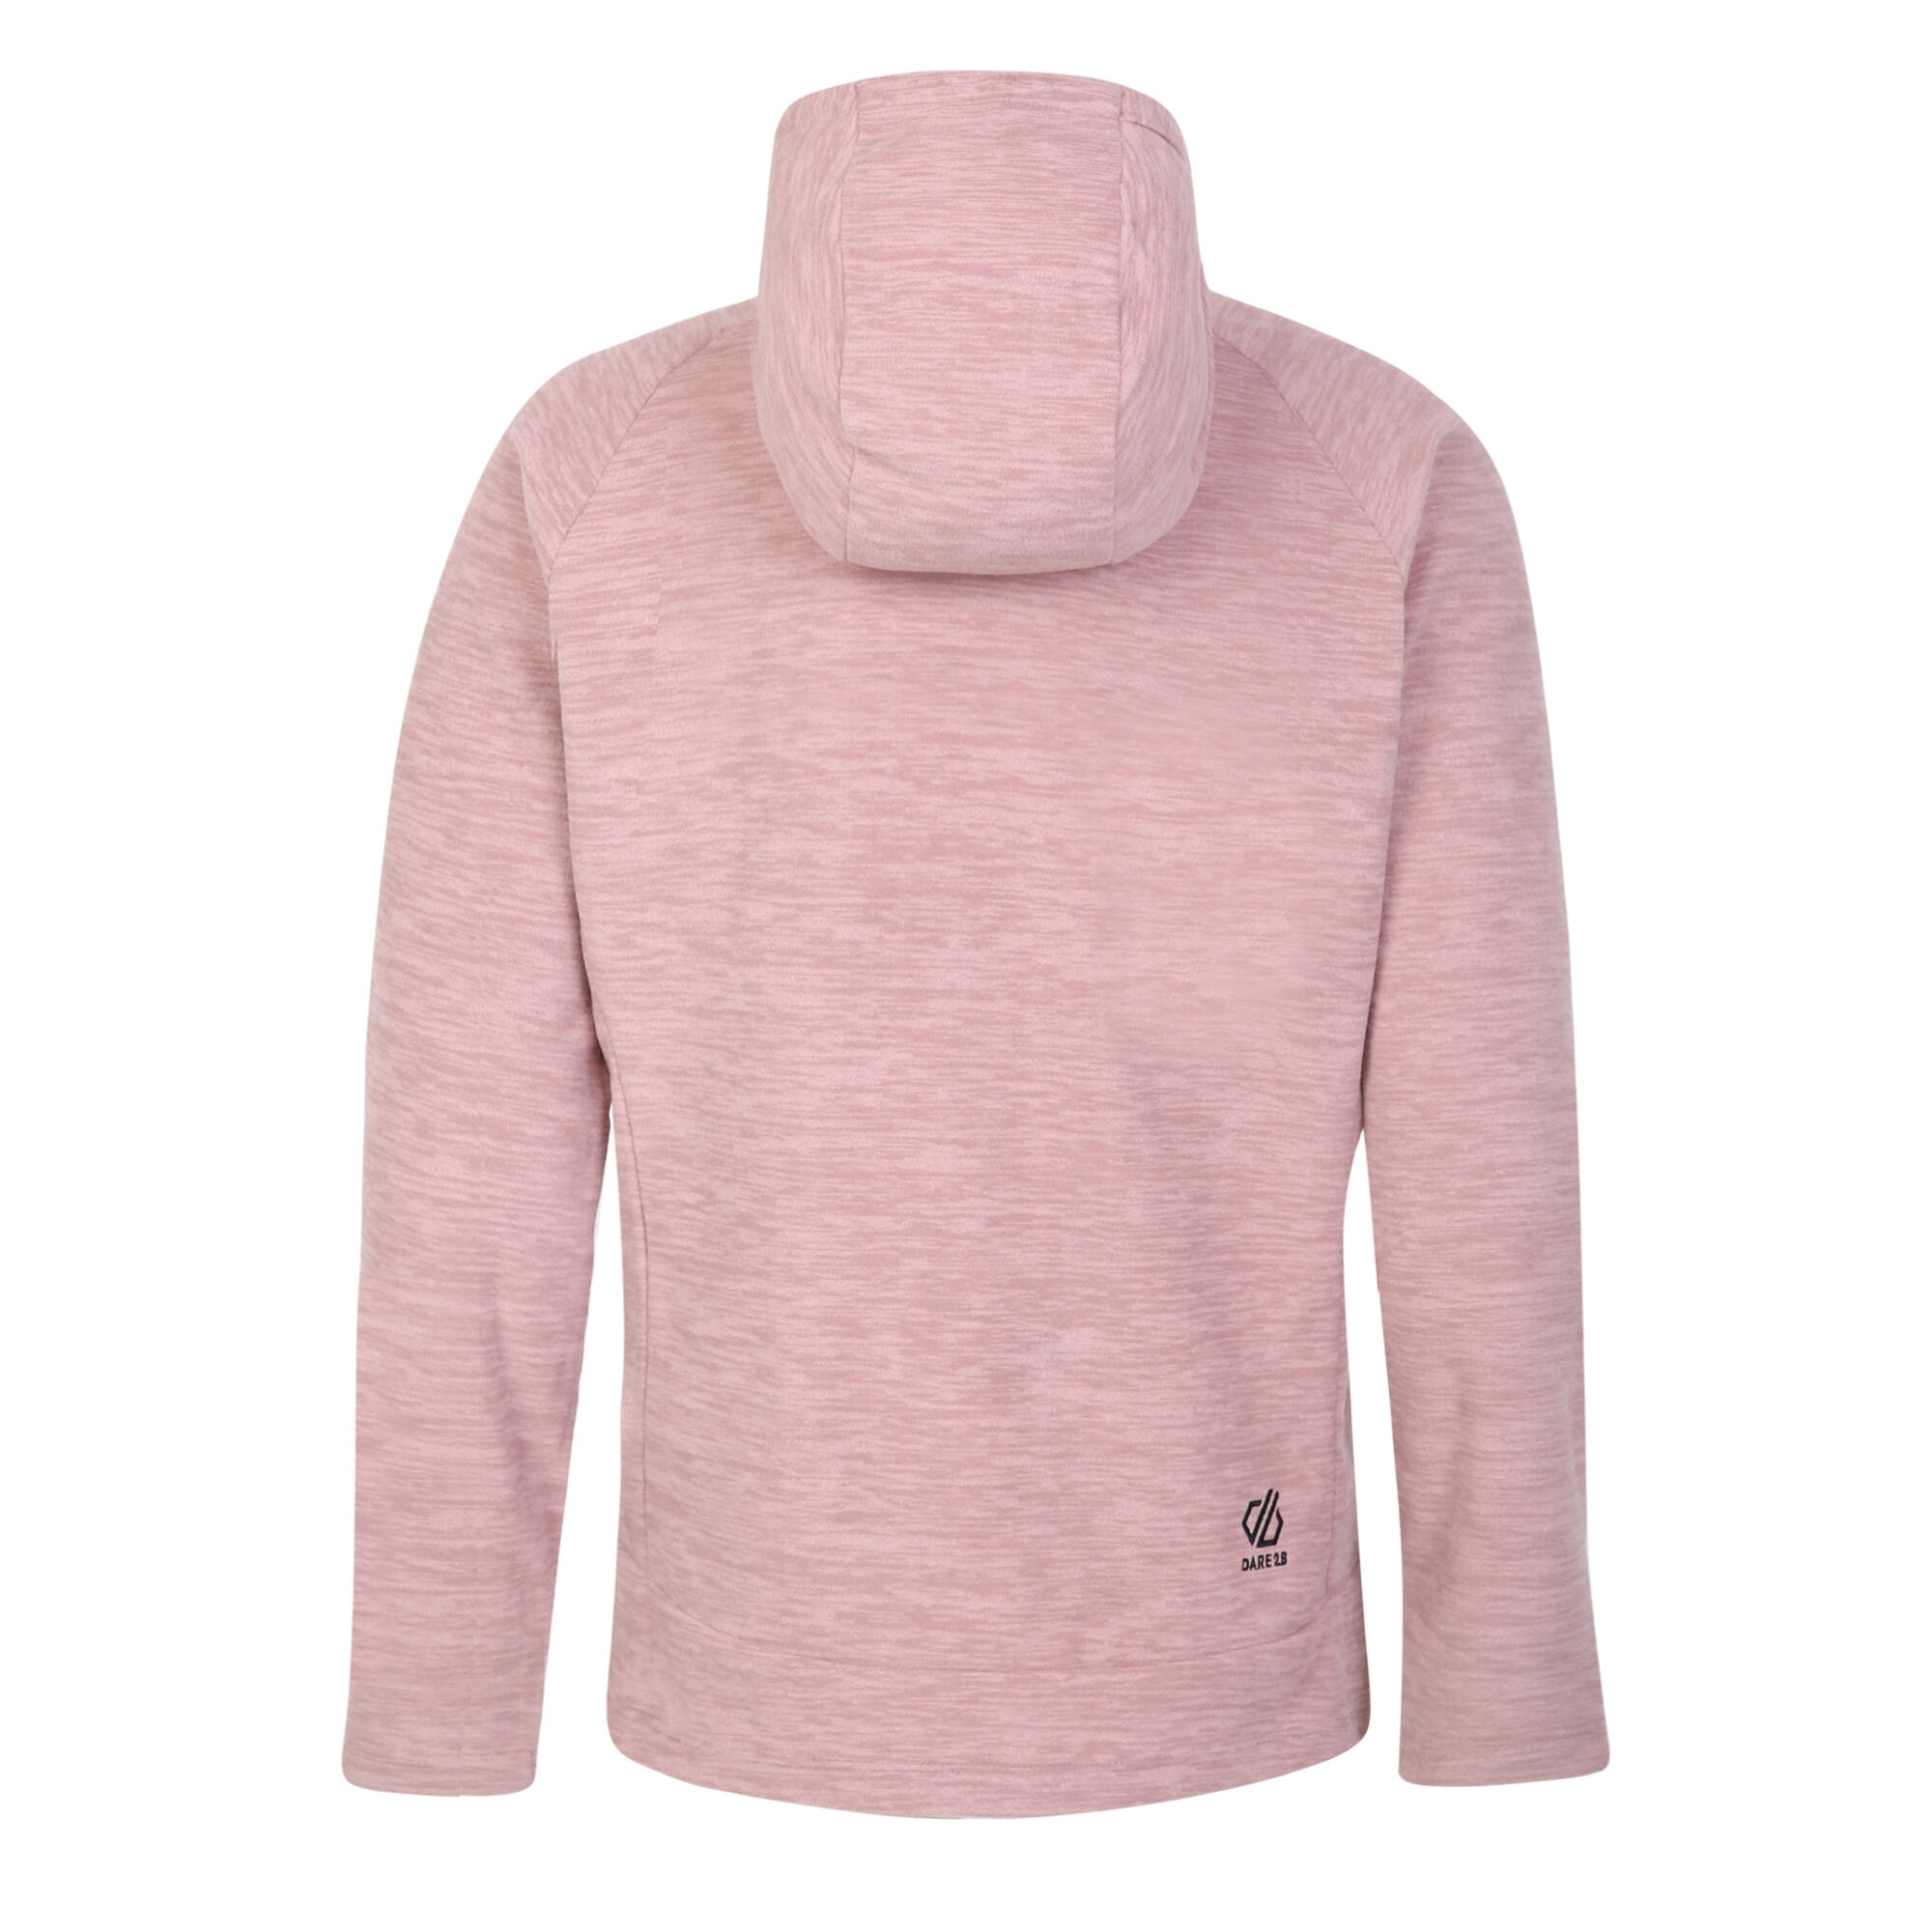 Womens/Ladies Out & Out Marl Full Zip Fleece Jacket (Dusky Rose) 2/4